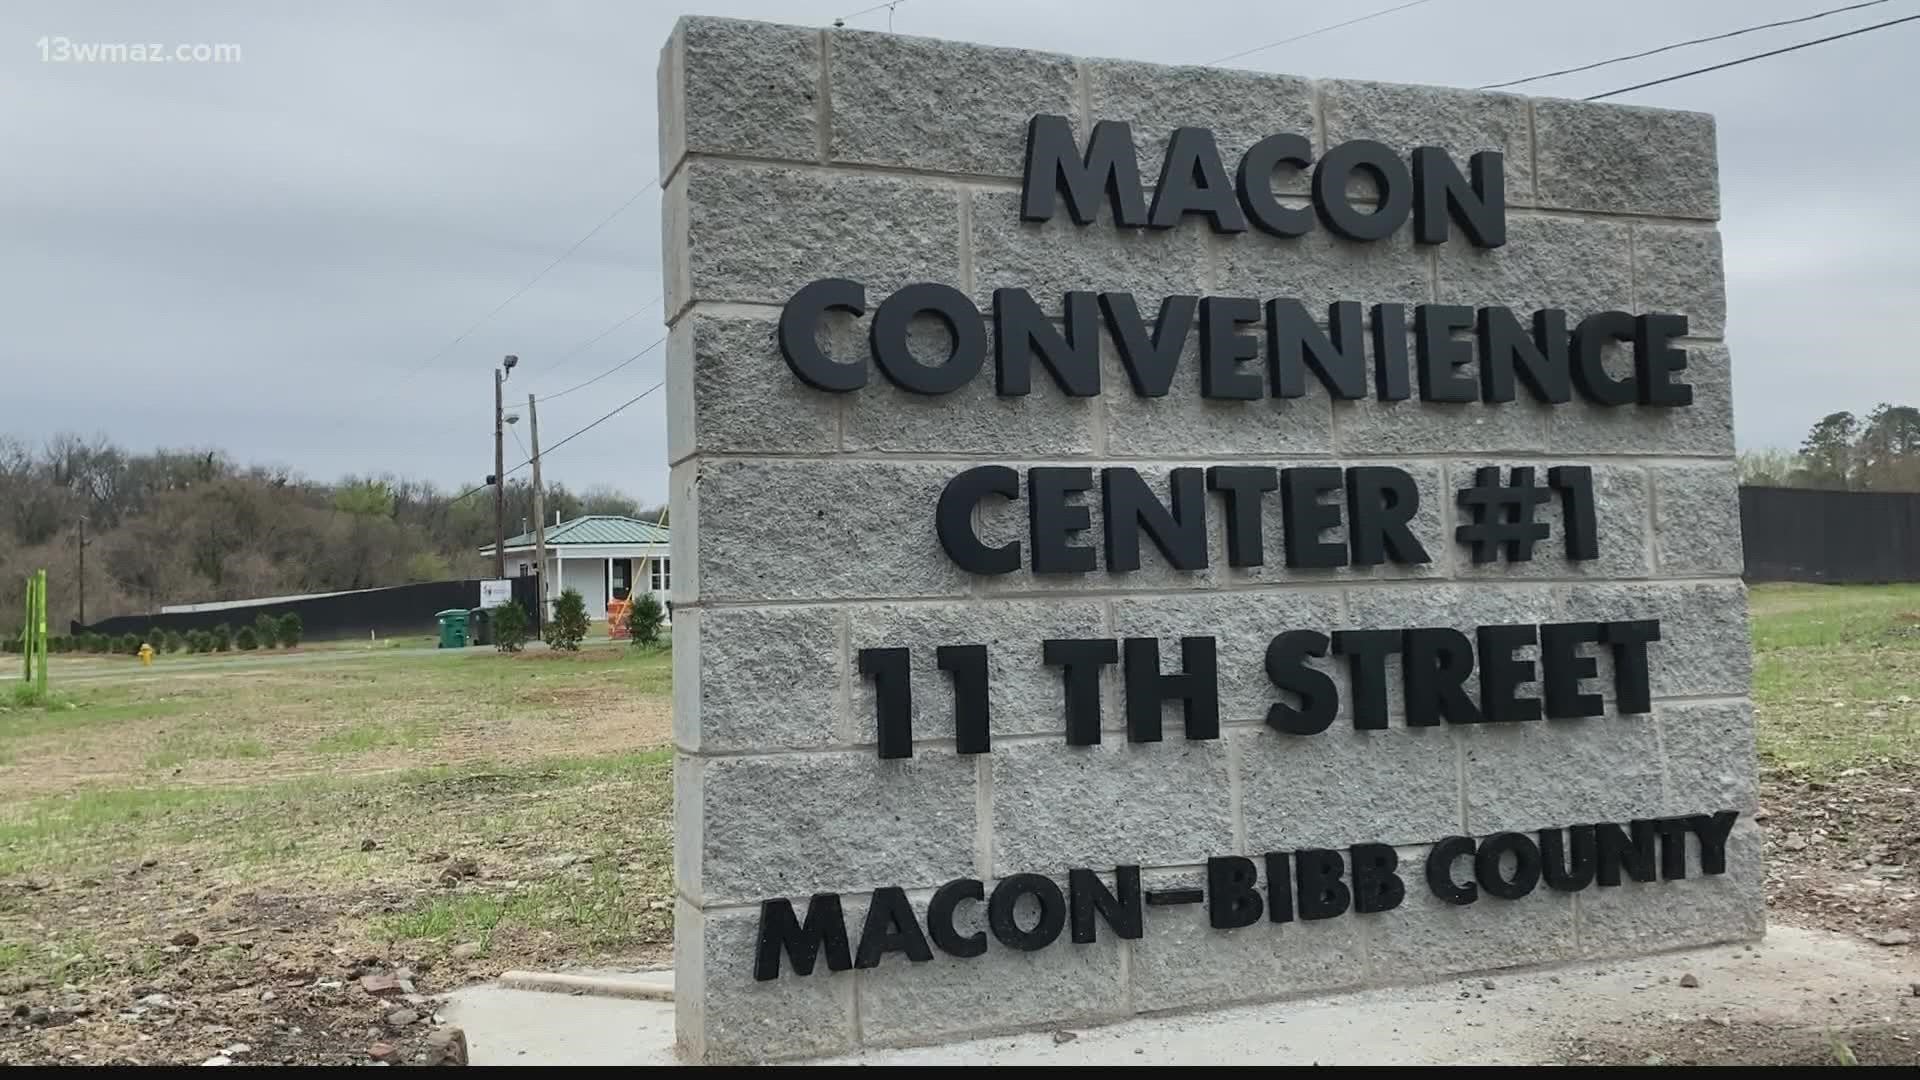 The new center will be located on Fulton Mill Road.